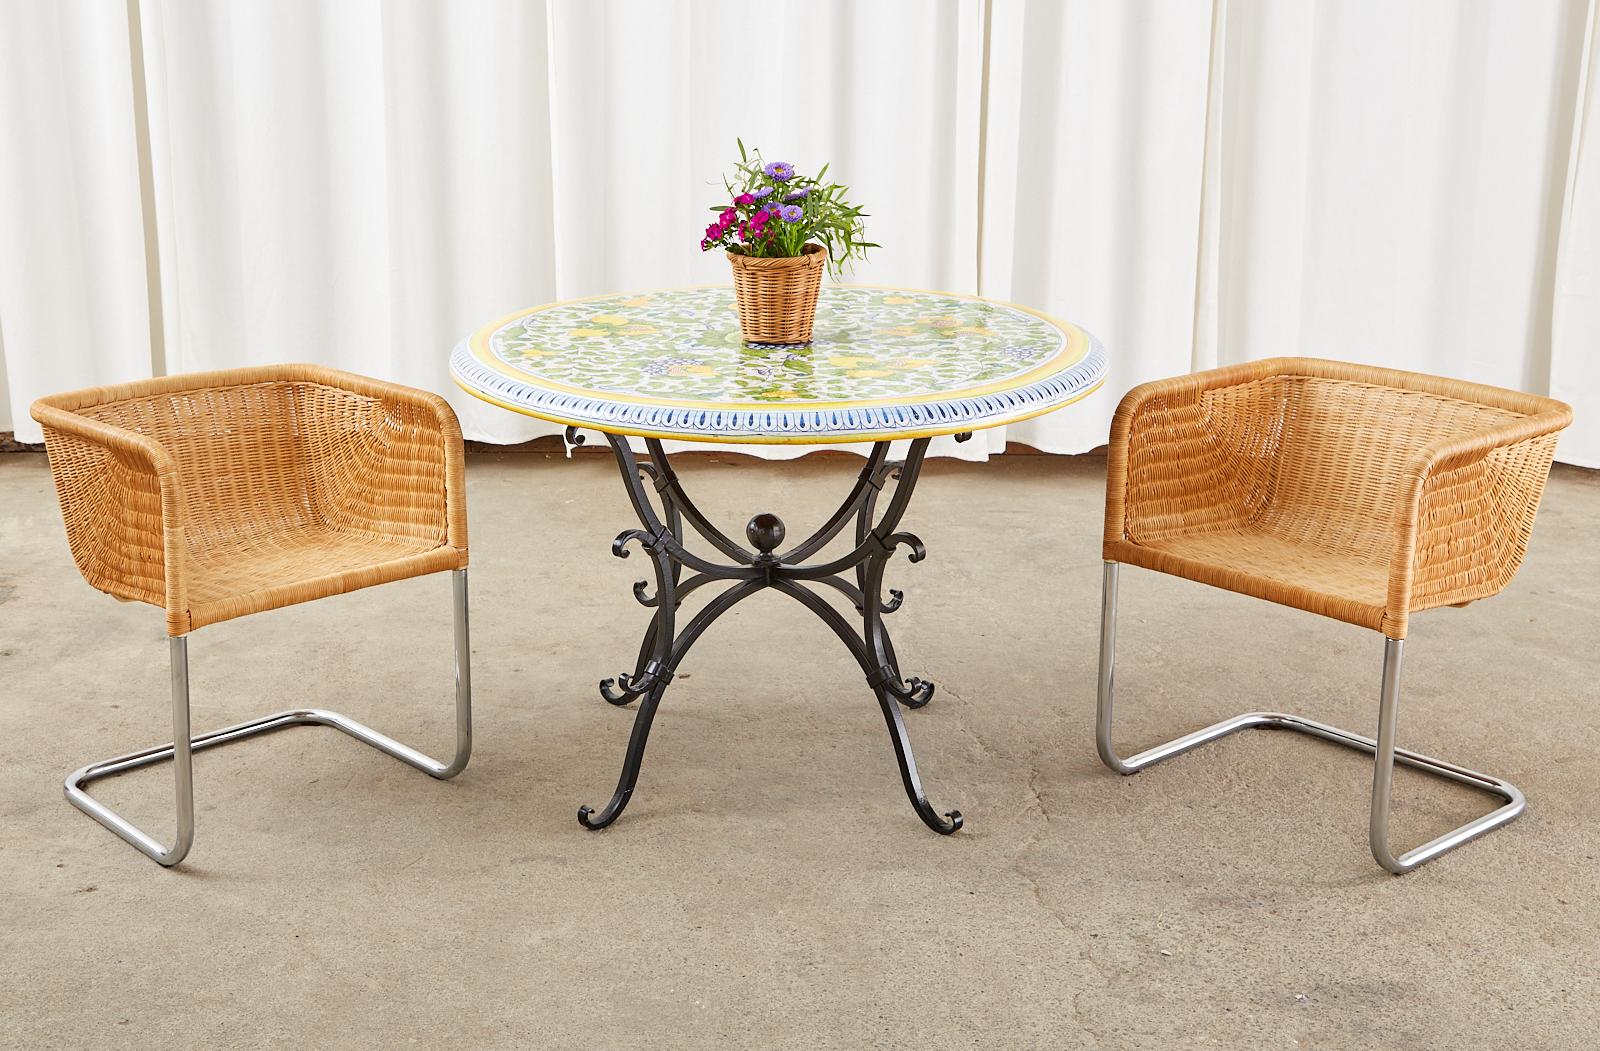 Gorgeous Italian pottery patio garden dining table featuring a round glazed, hand-painted top. The Mediterranean themed table is embellished with white pomegranates and Amalfi yellow lemons over a white ground. There are grape clusters and scrolling